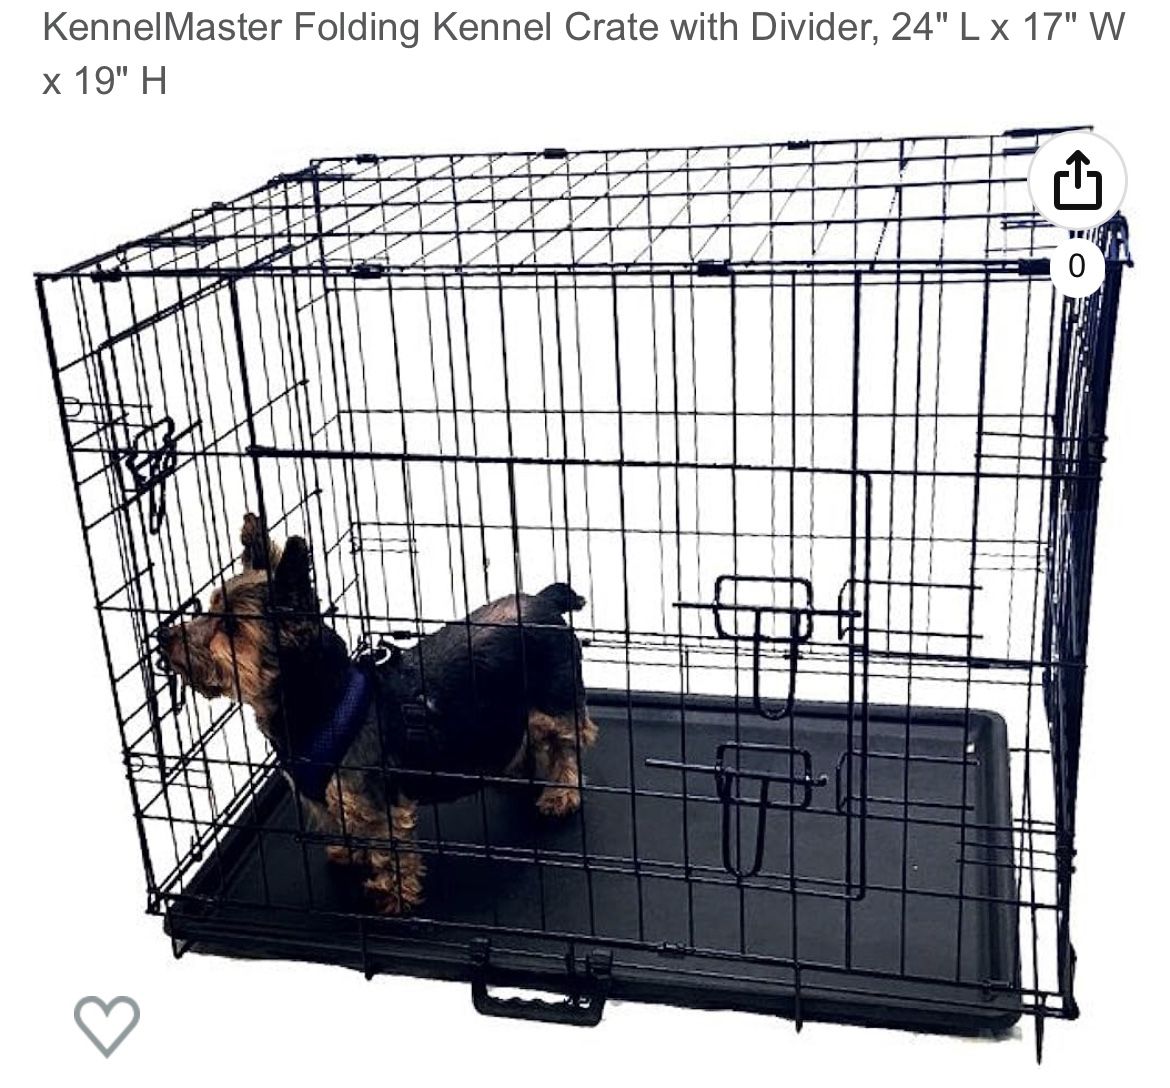 KennelMaster Double Door Folding Wire Dog Crate, Black, X-Small, 24"L